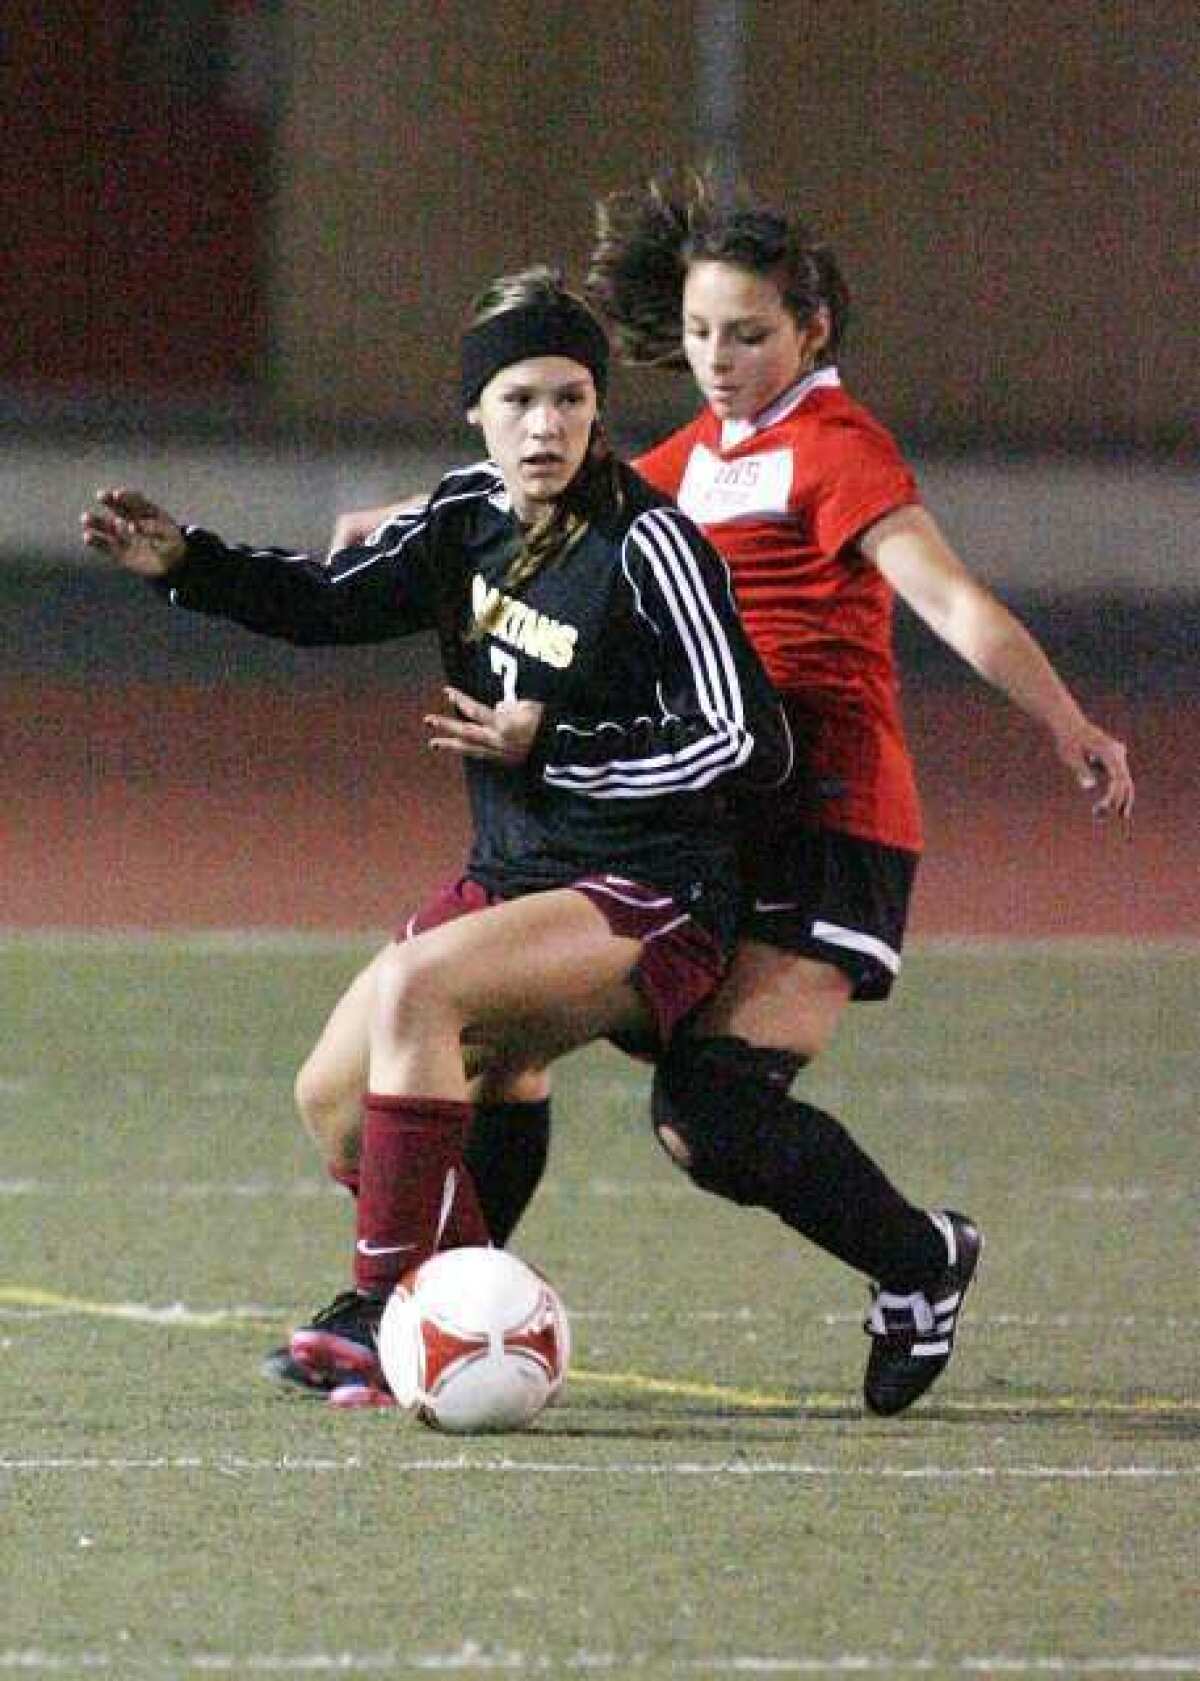 La Canada sophomore forward Megan Decker recorded her second hat trick of the season for the Spartans.